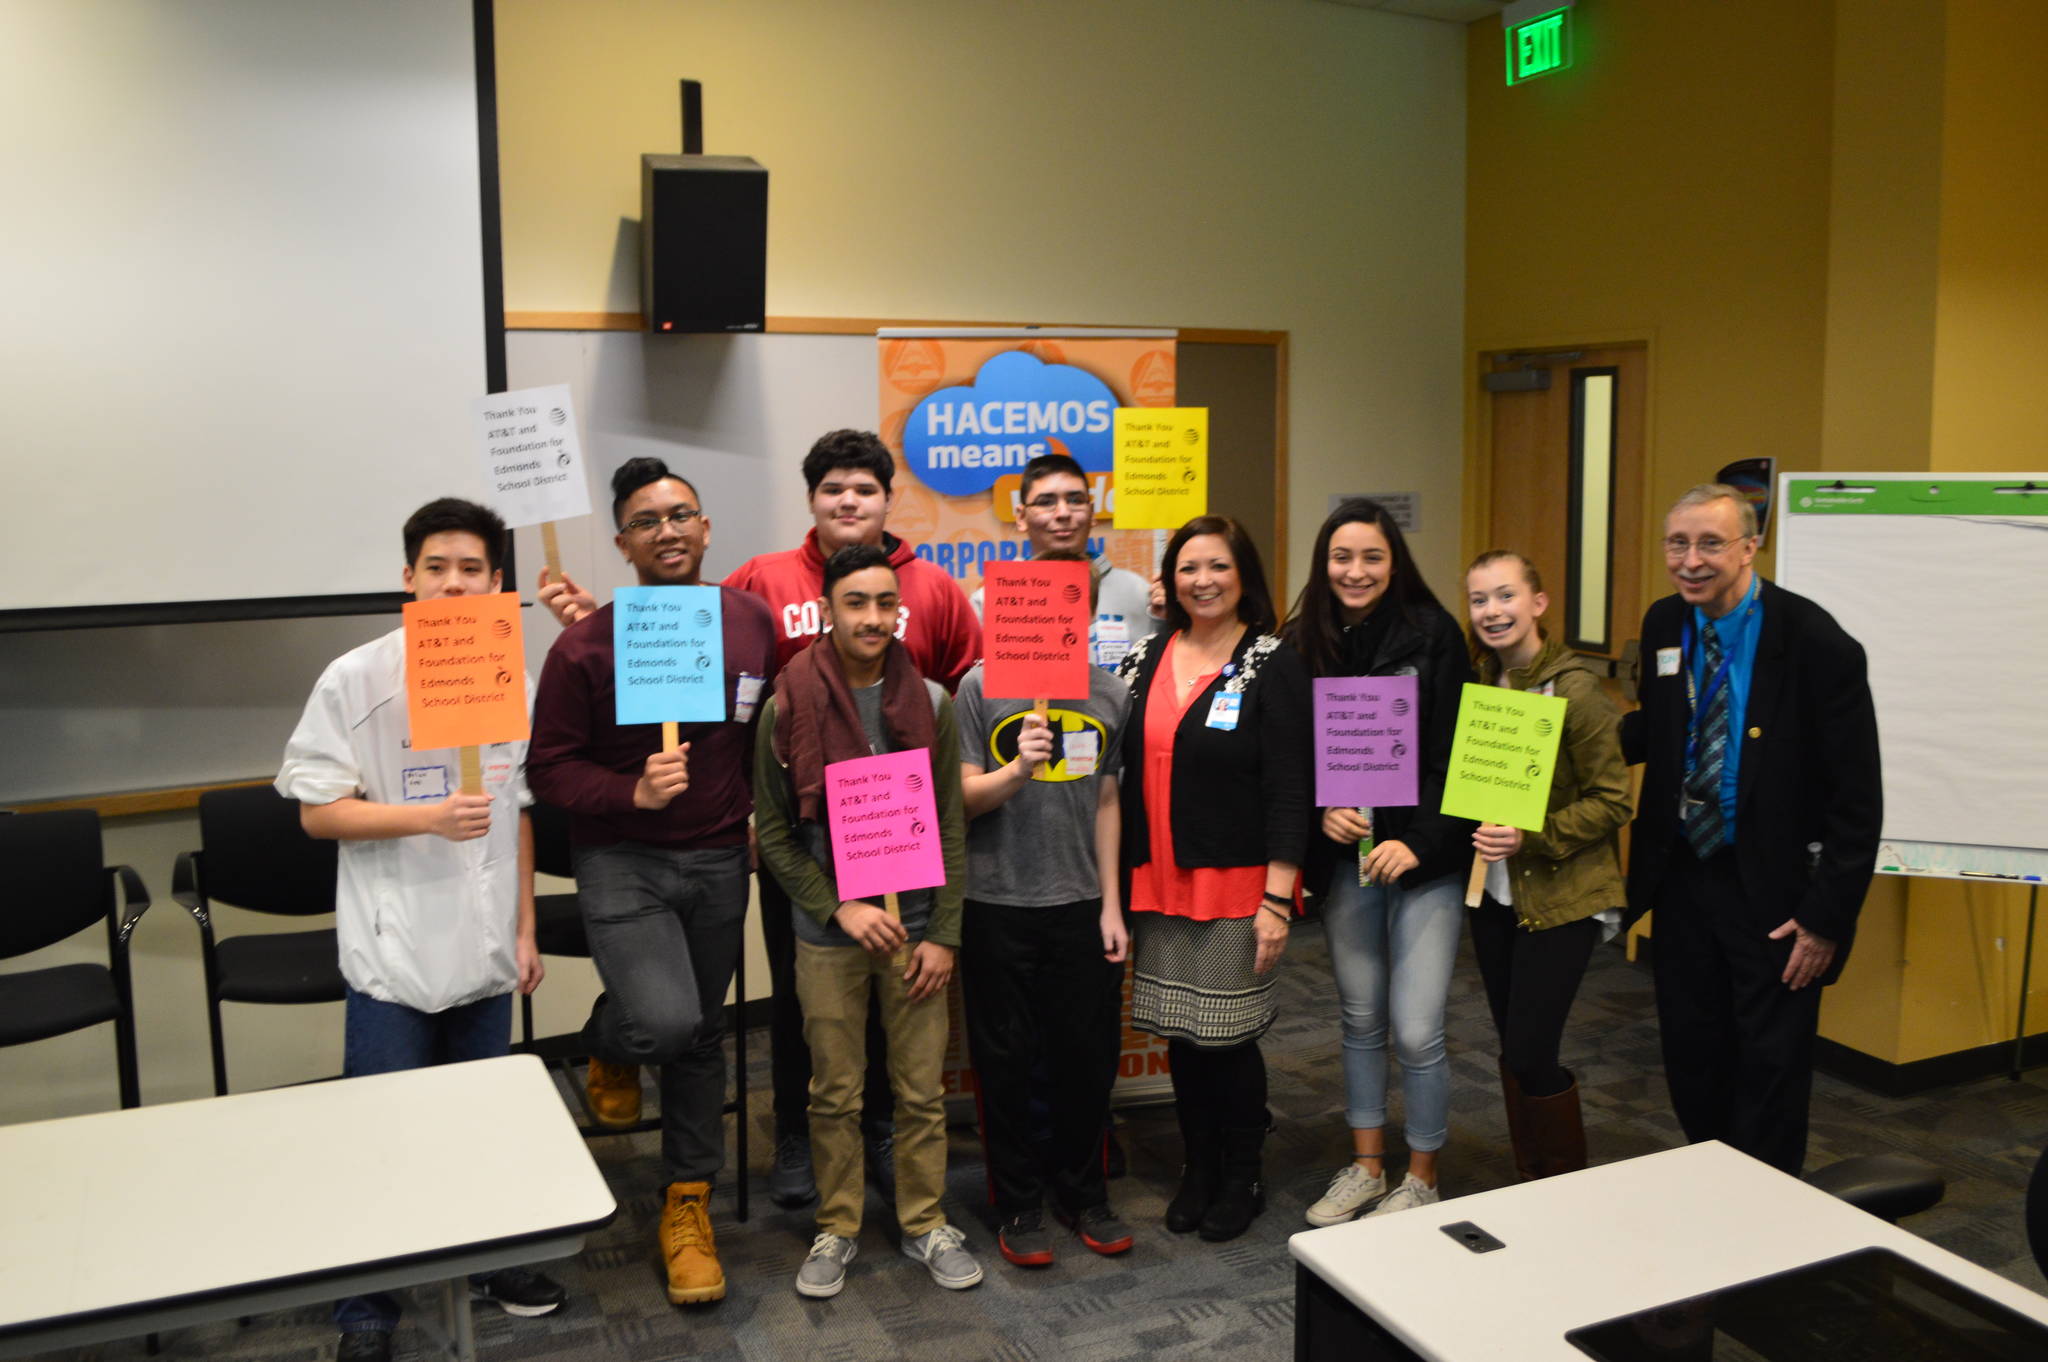 Bothell AT&T employees showed local Latino students abut careers opporunities in Science, Technology, Engineering and Math (STEM) on Feb. 23. Contributed photo